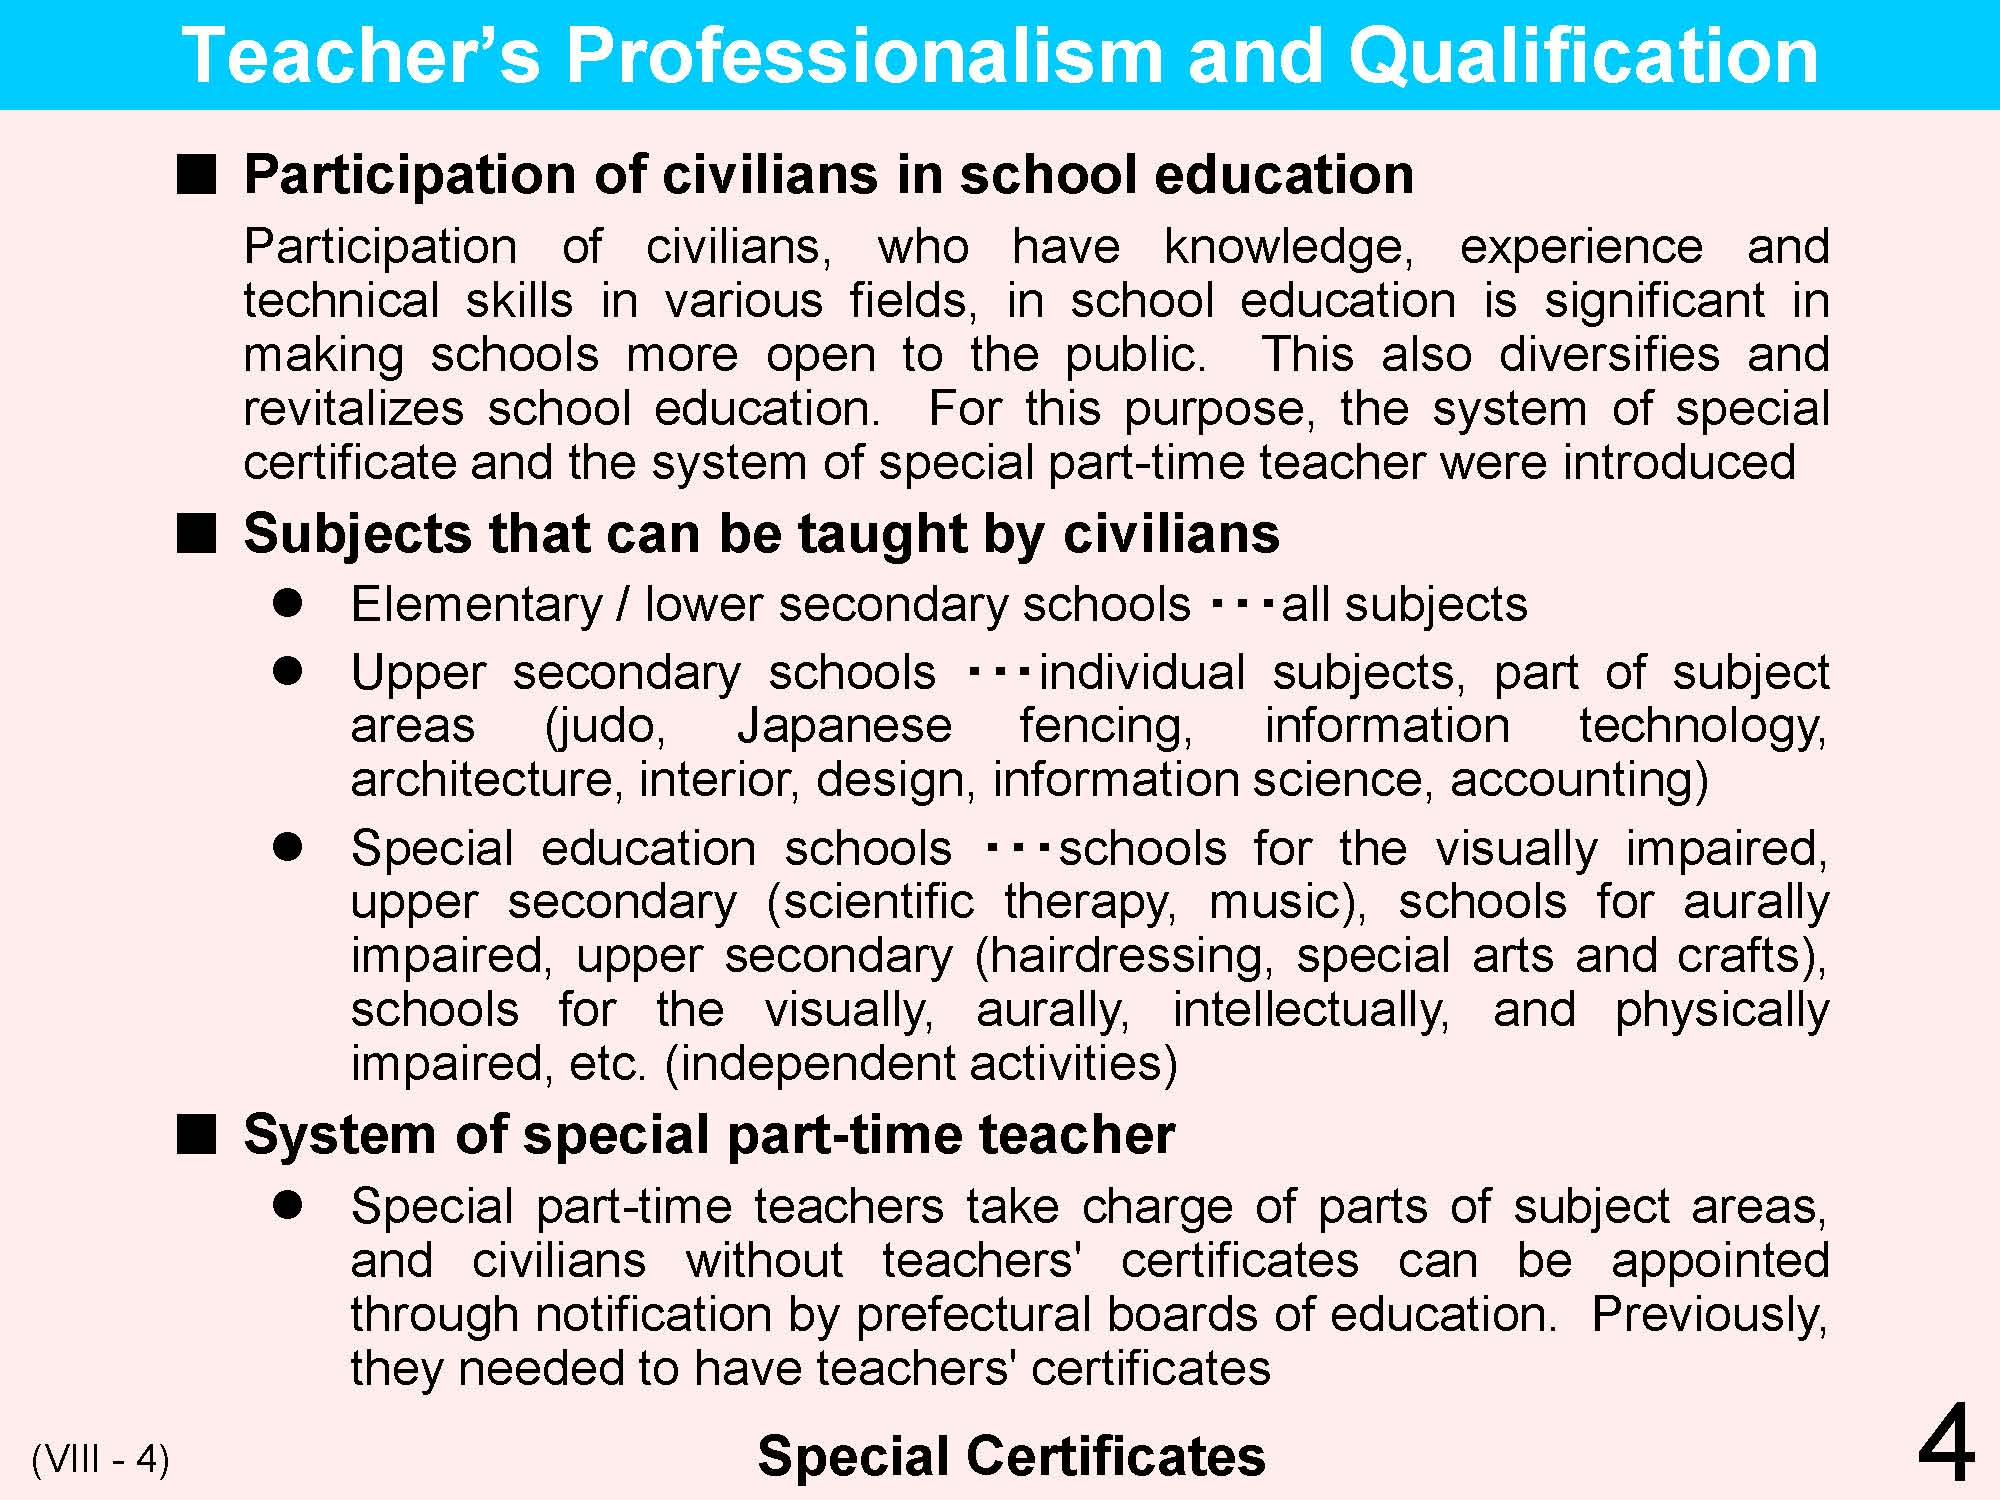 VIII Teacher's Qualifications / Training / Appointment